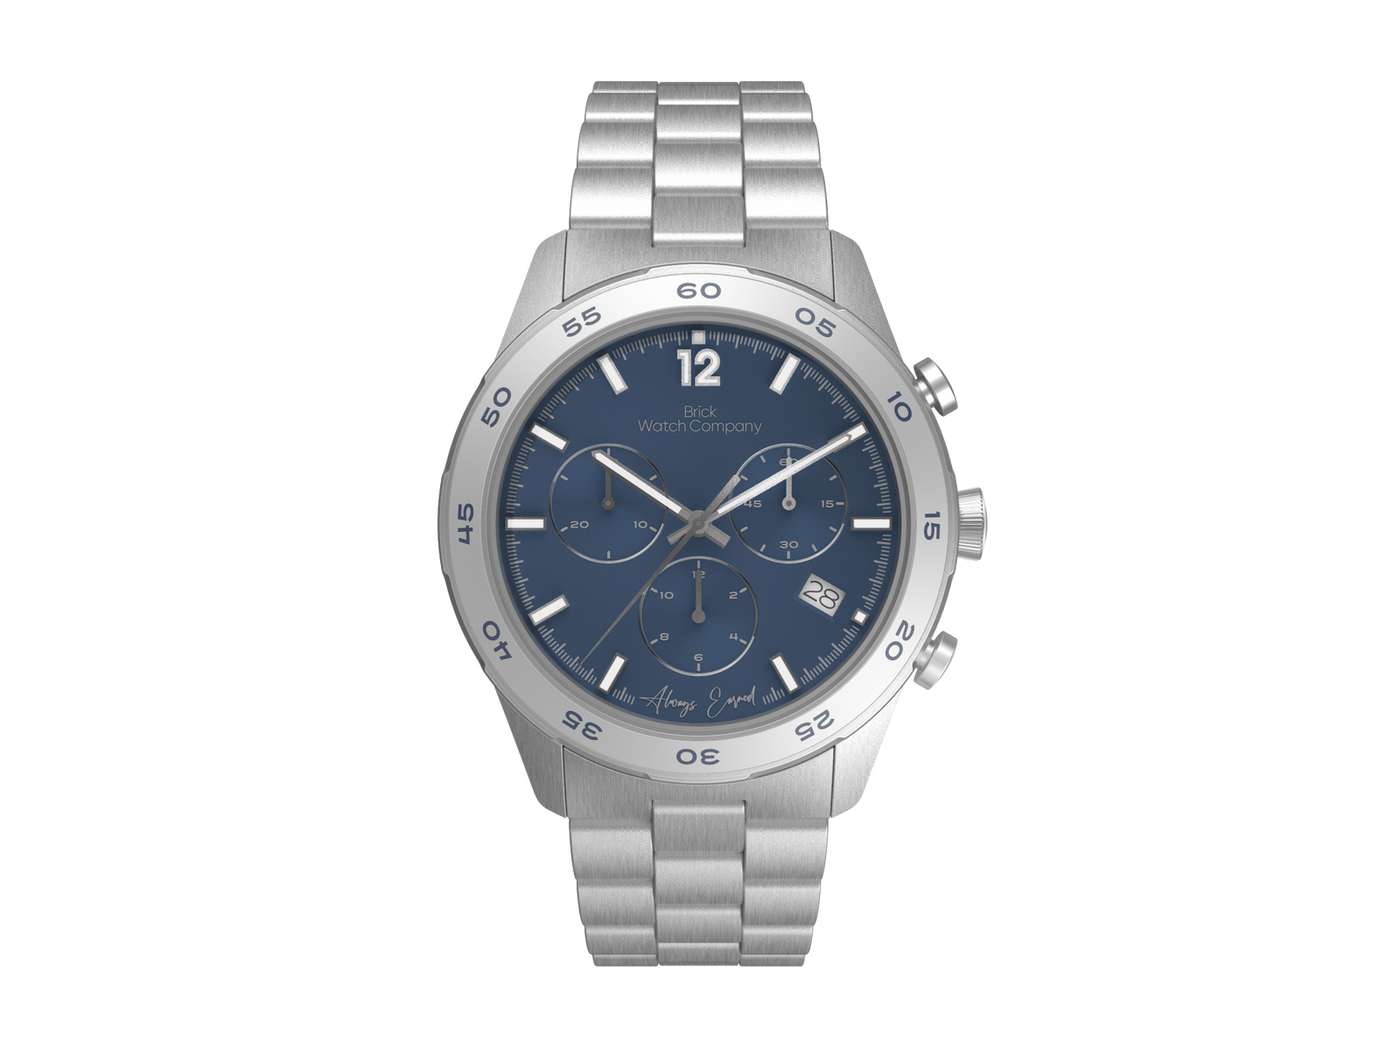 Chrono-Diver - Silver Case, Navy Dial, White Lumi Numbers